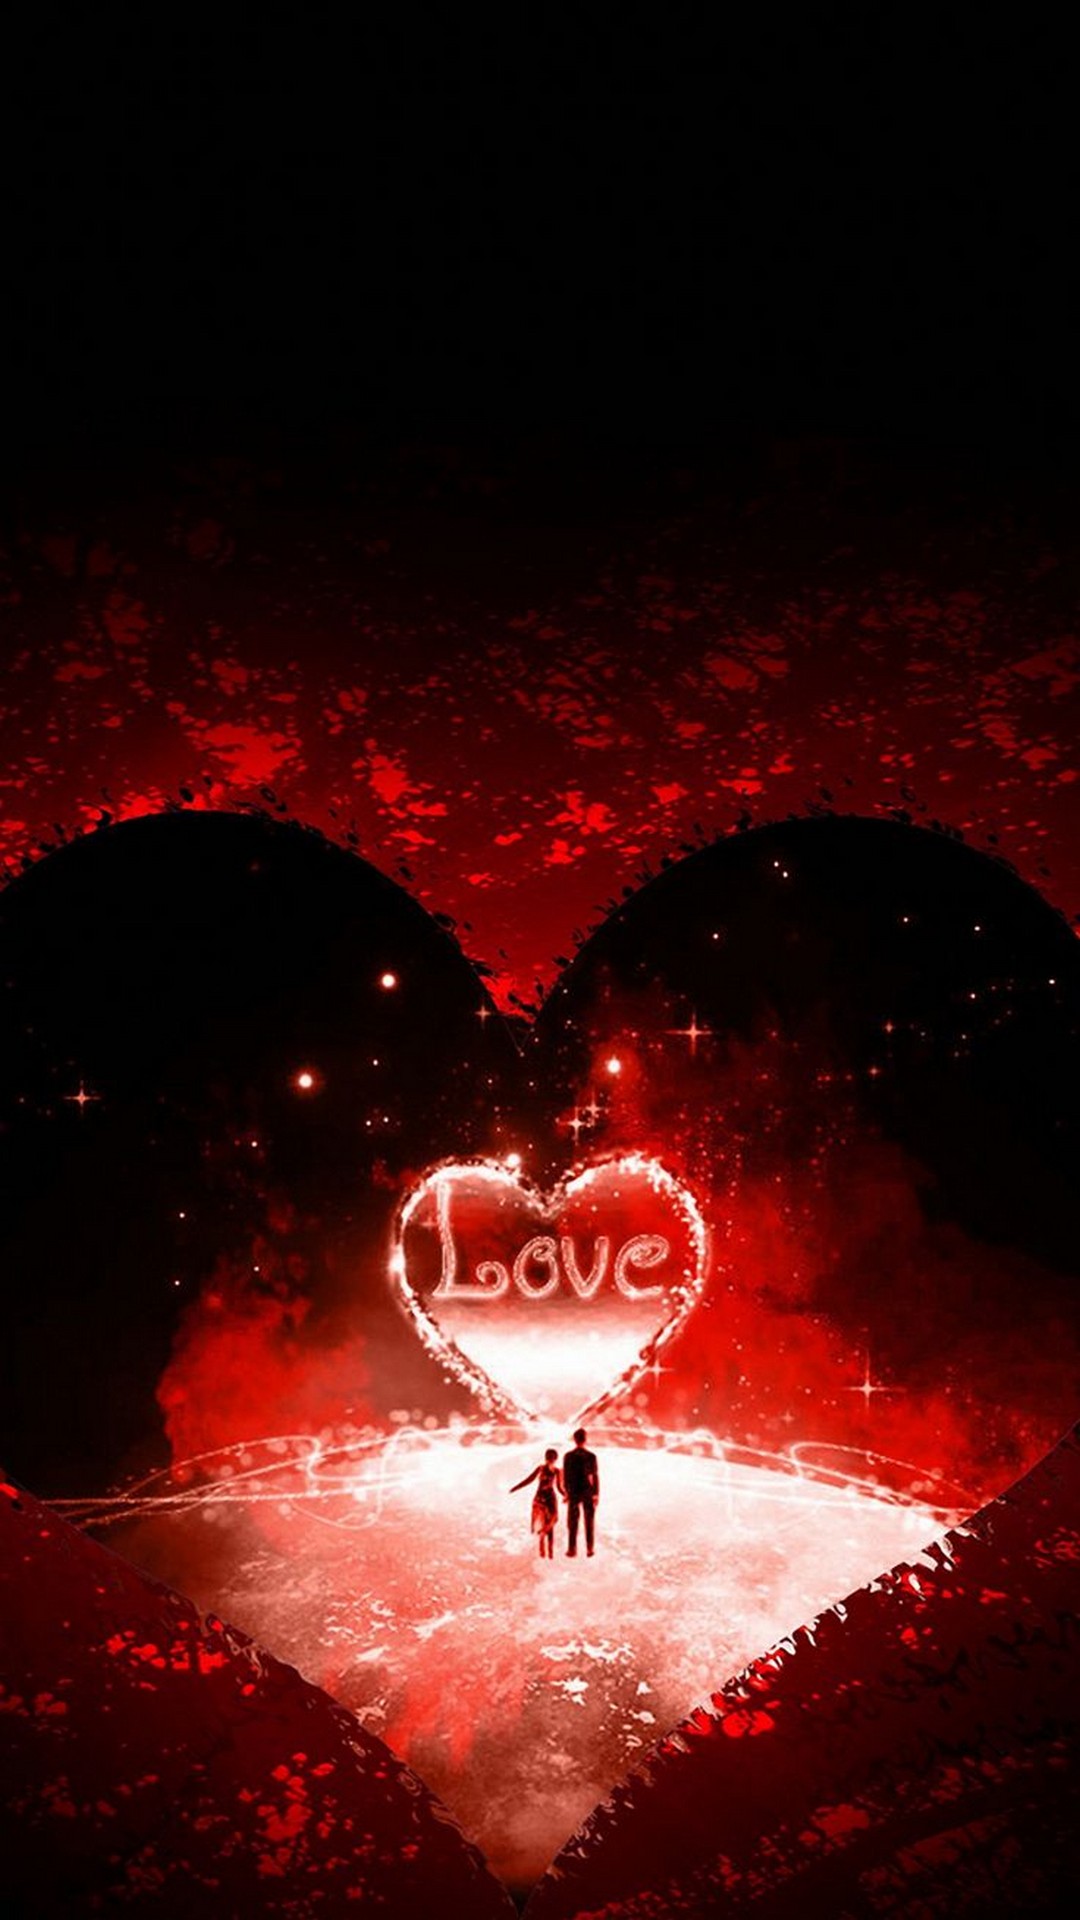 Wallpaper Valentines Day Cards Android with HD resolution 1080x1920